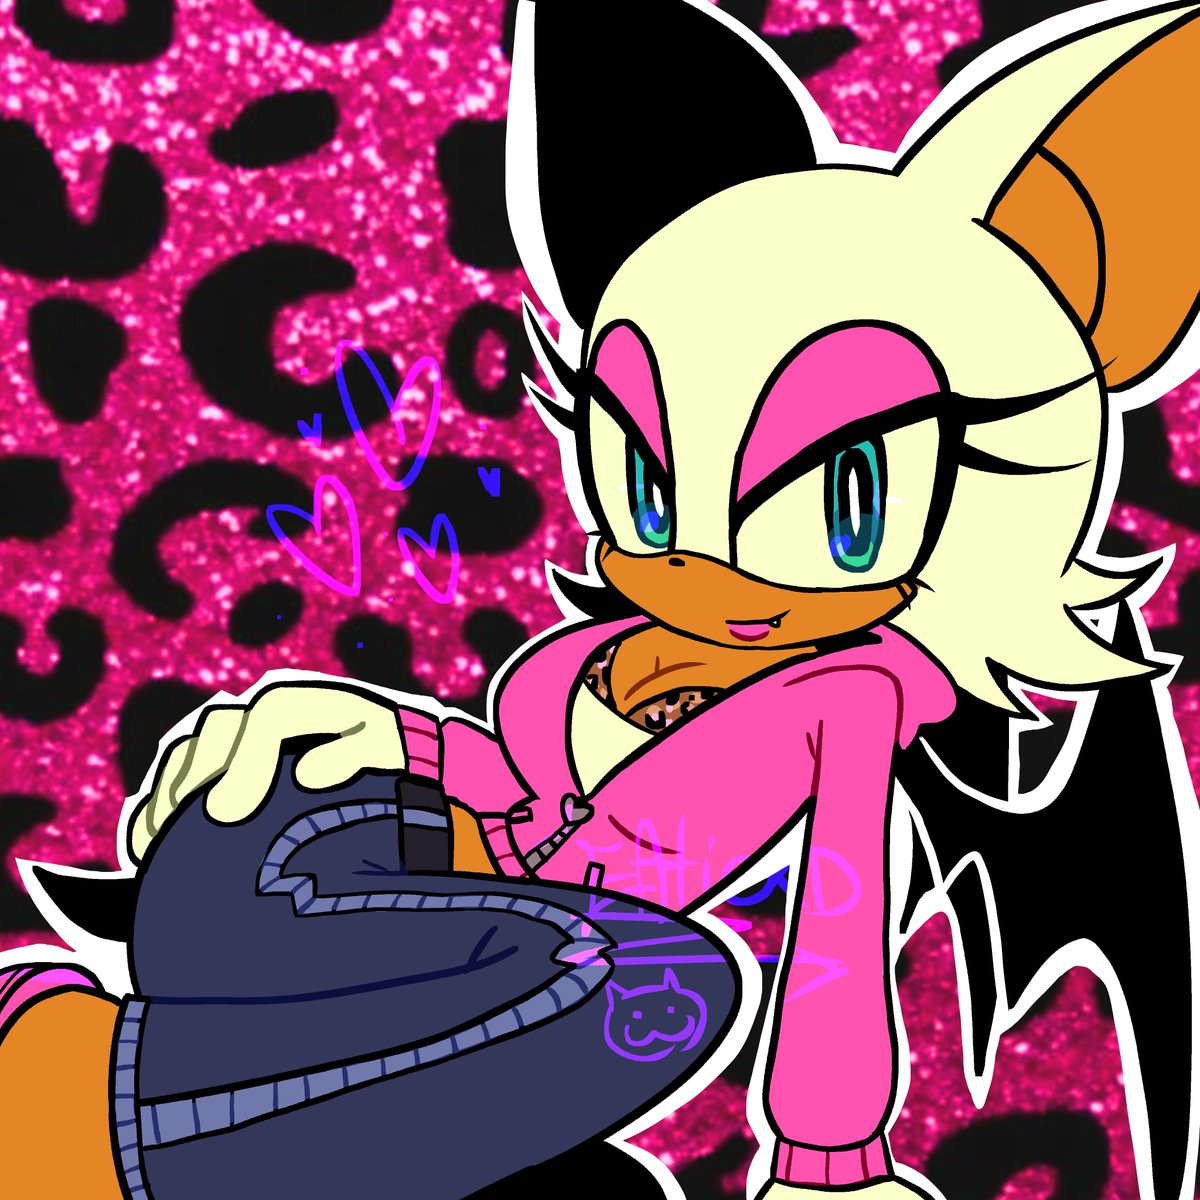 a latina for you from a latina #RougeTheBat #SonicTheHedeghog